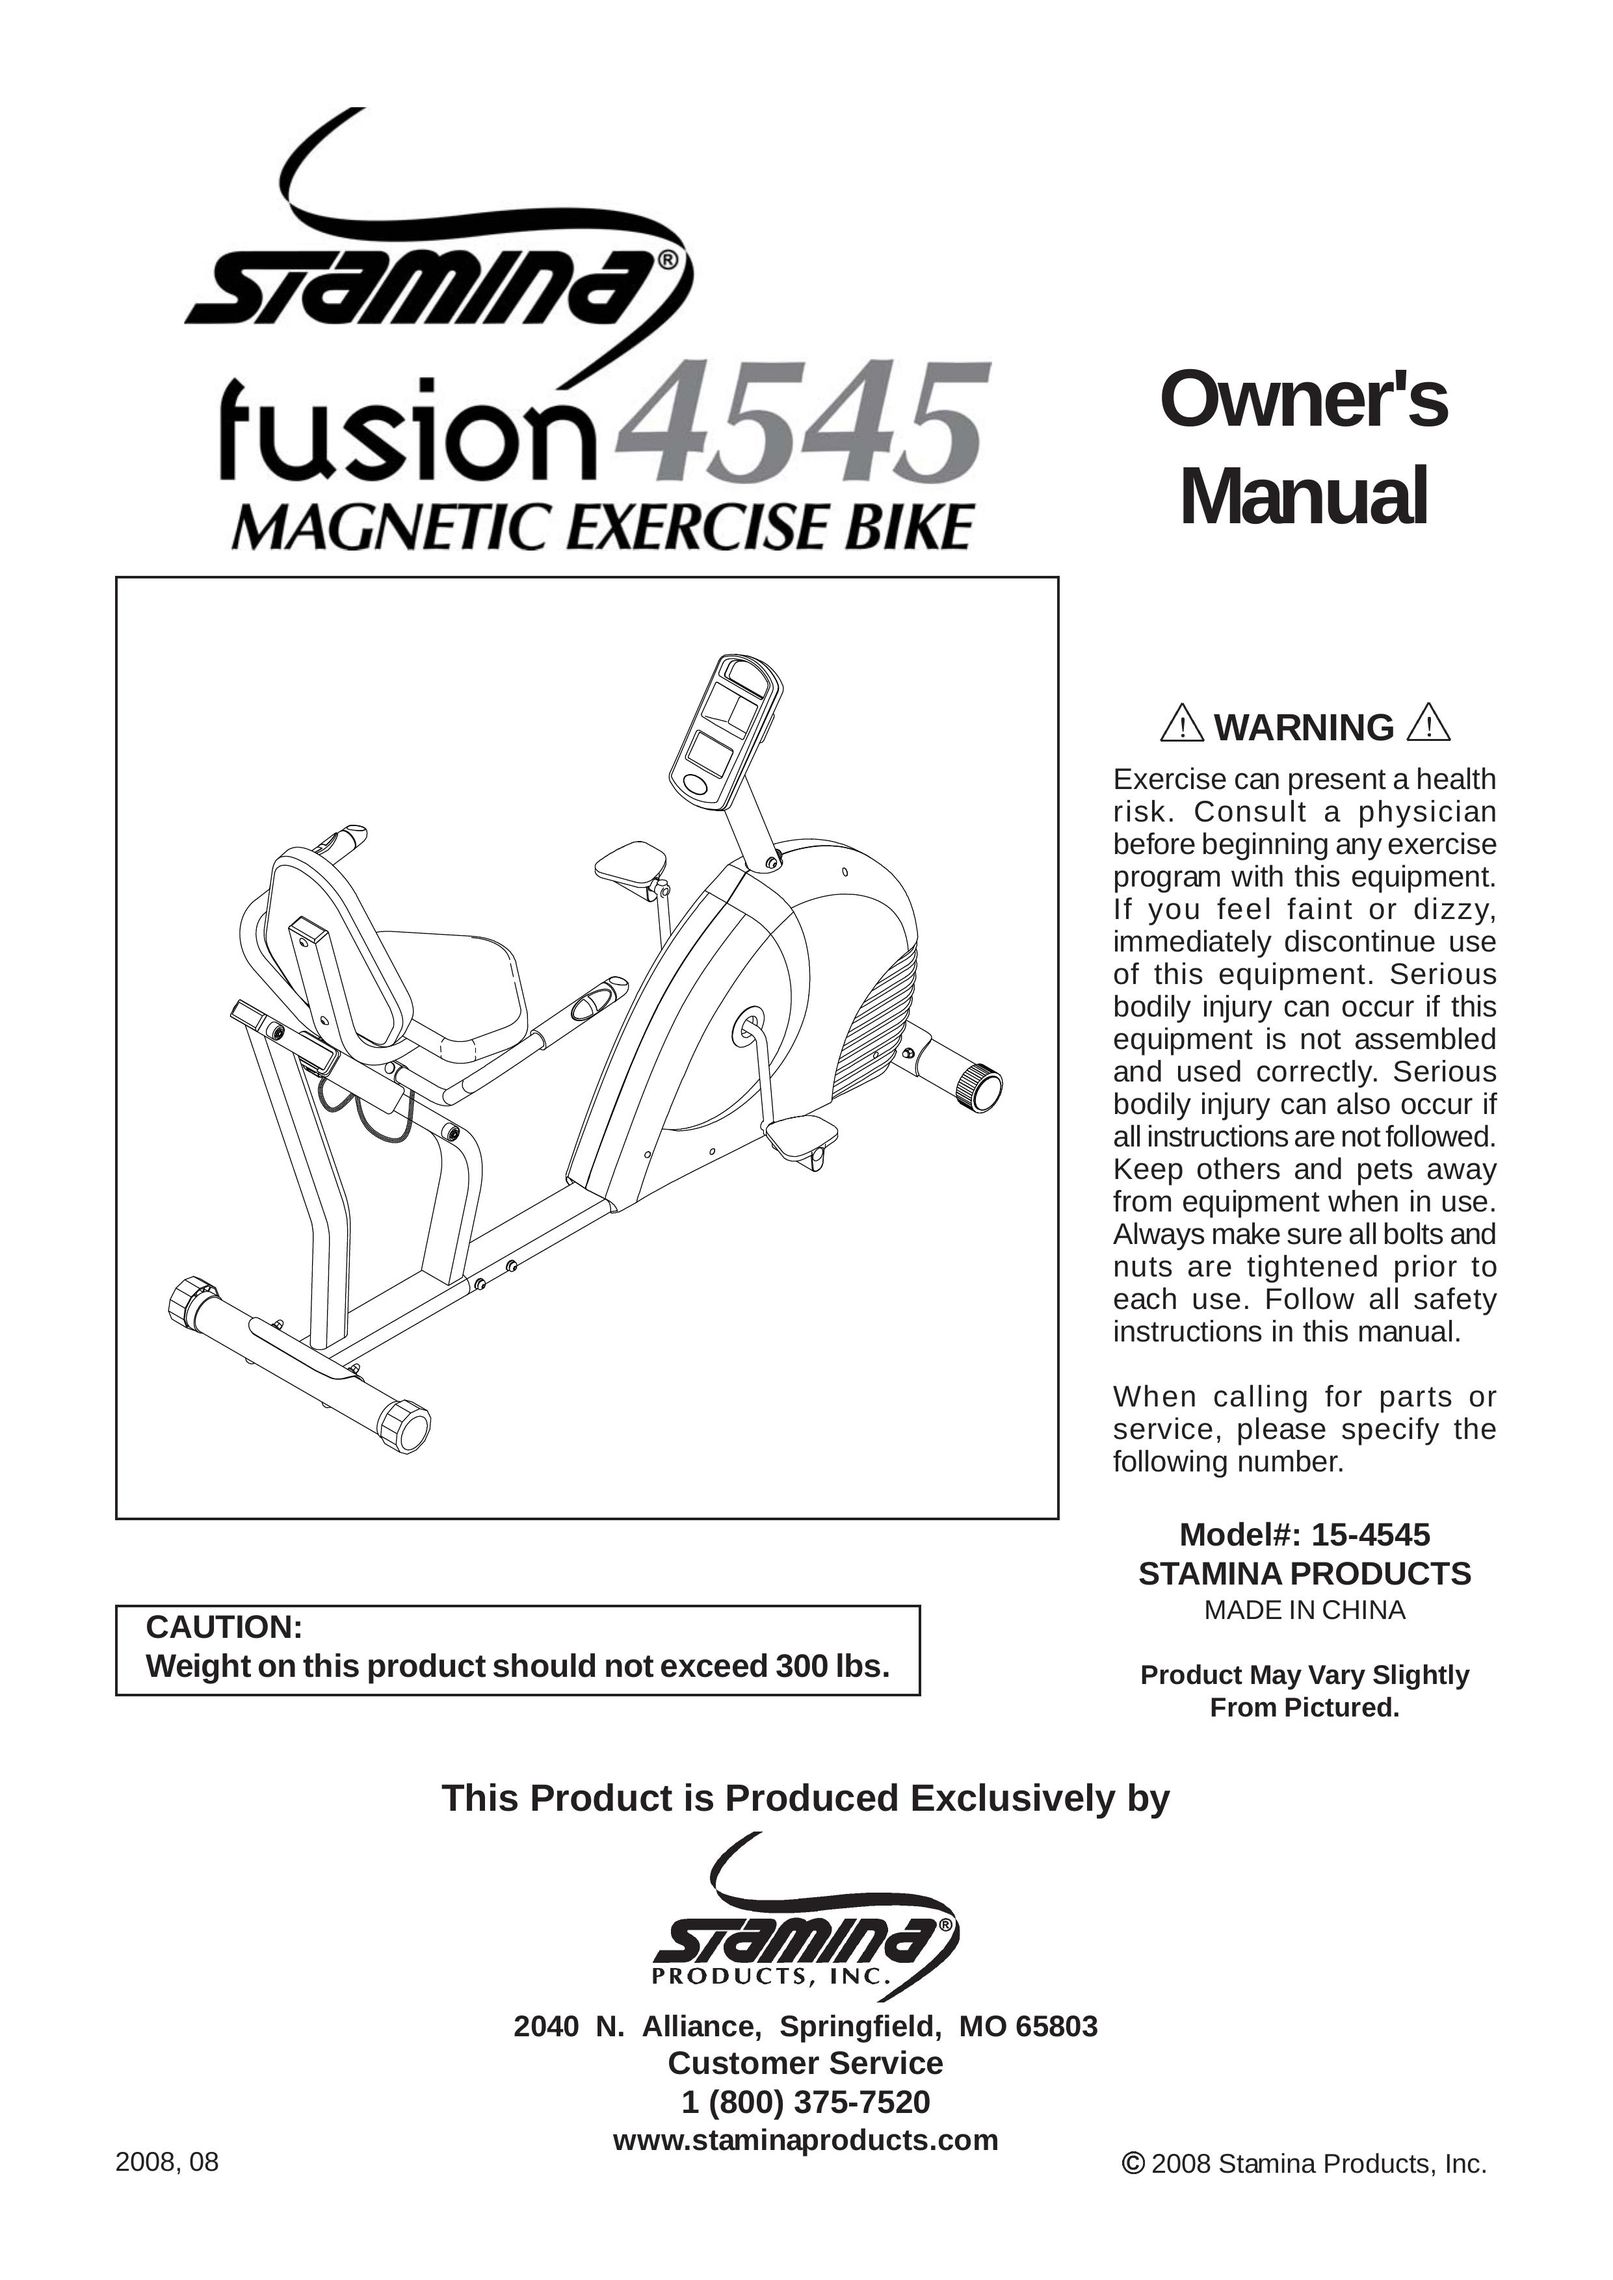 Stamina Products 15-4545 Elliptical Trainer User Manual